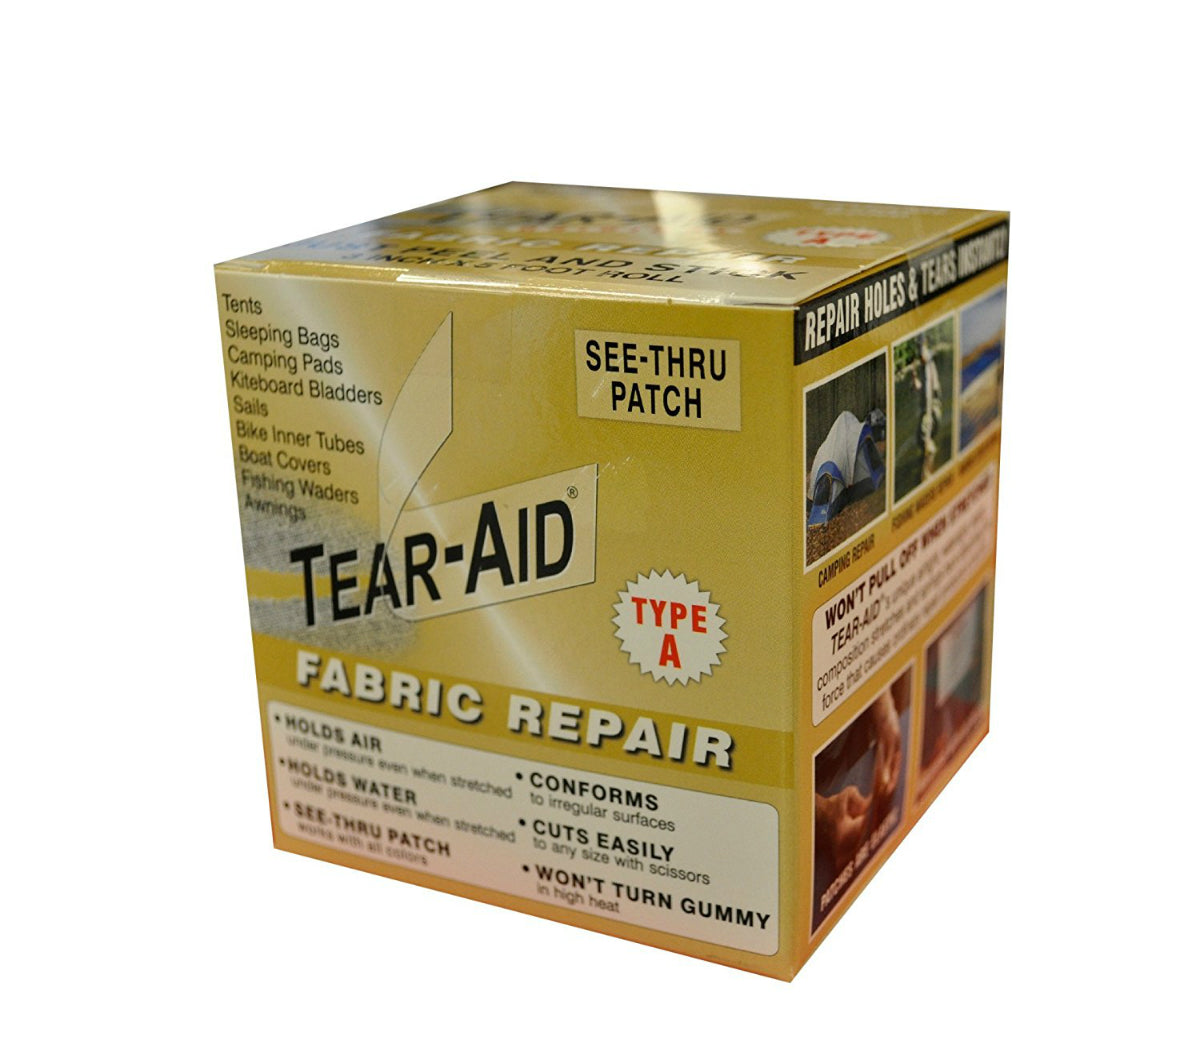 Tear-Aid D-ROLL-A-20 Fabric Repair Patch Kit, Type A